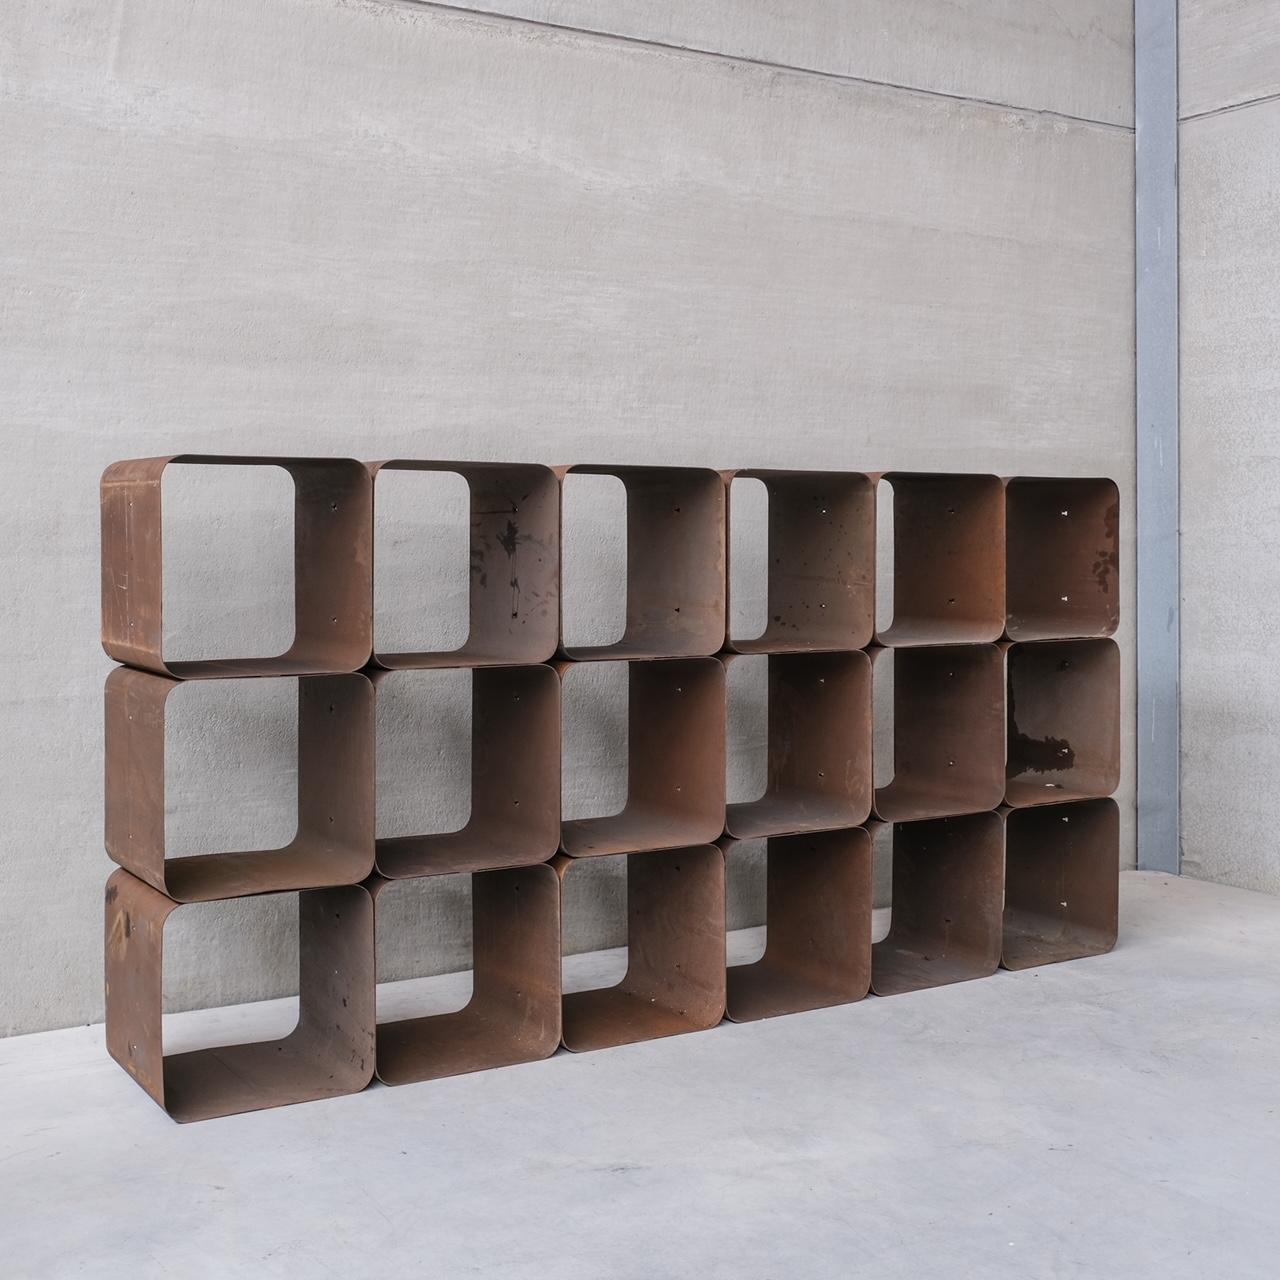 A set of 18 metal cubes, which are modular, so can be combined to create shelving or used individually as side tables.

Belgium, circa 1970s.

In rustic original patina, with scuffs commensurate with age. These could be sprayed to update them, which